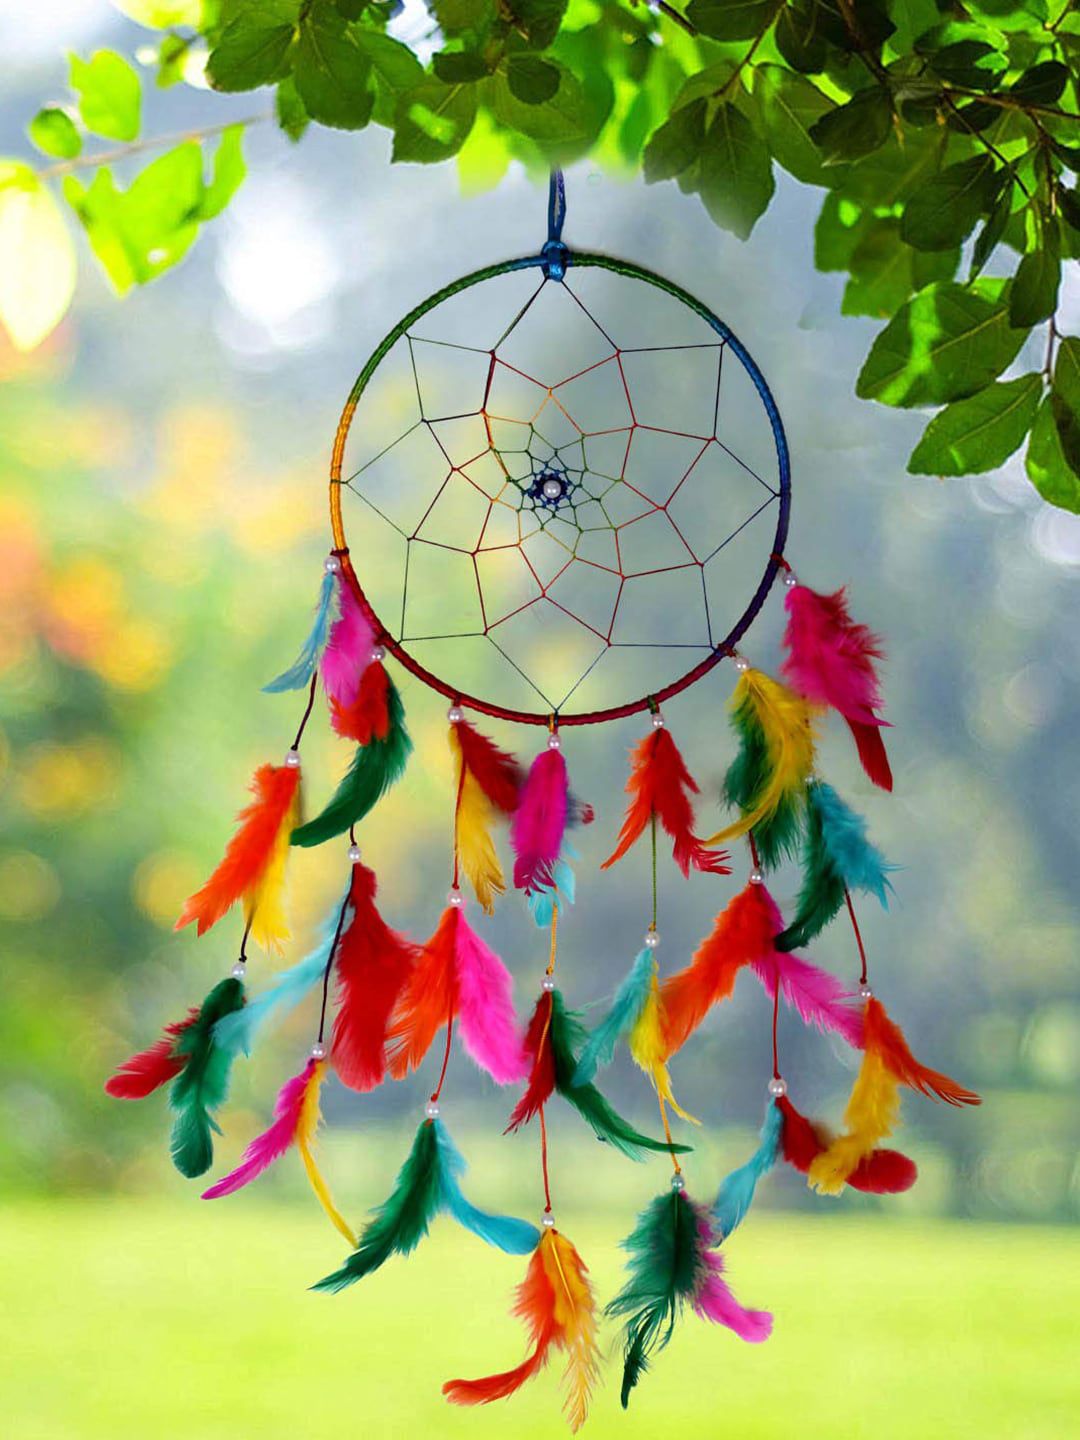 DULI Multicolour Handmade One Ring Dreamcatcher Hanging Price in India